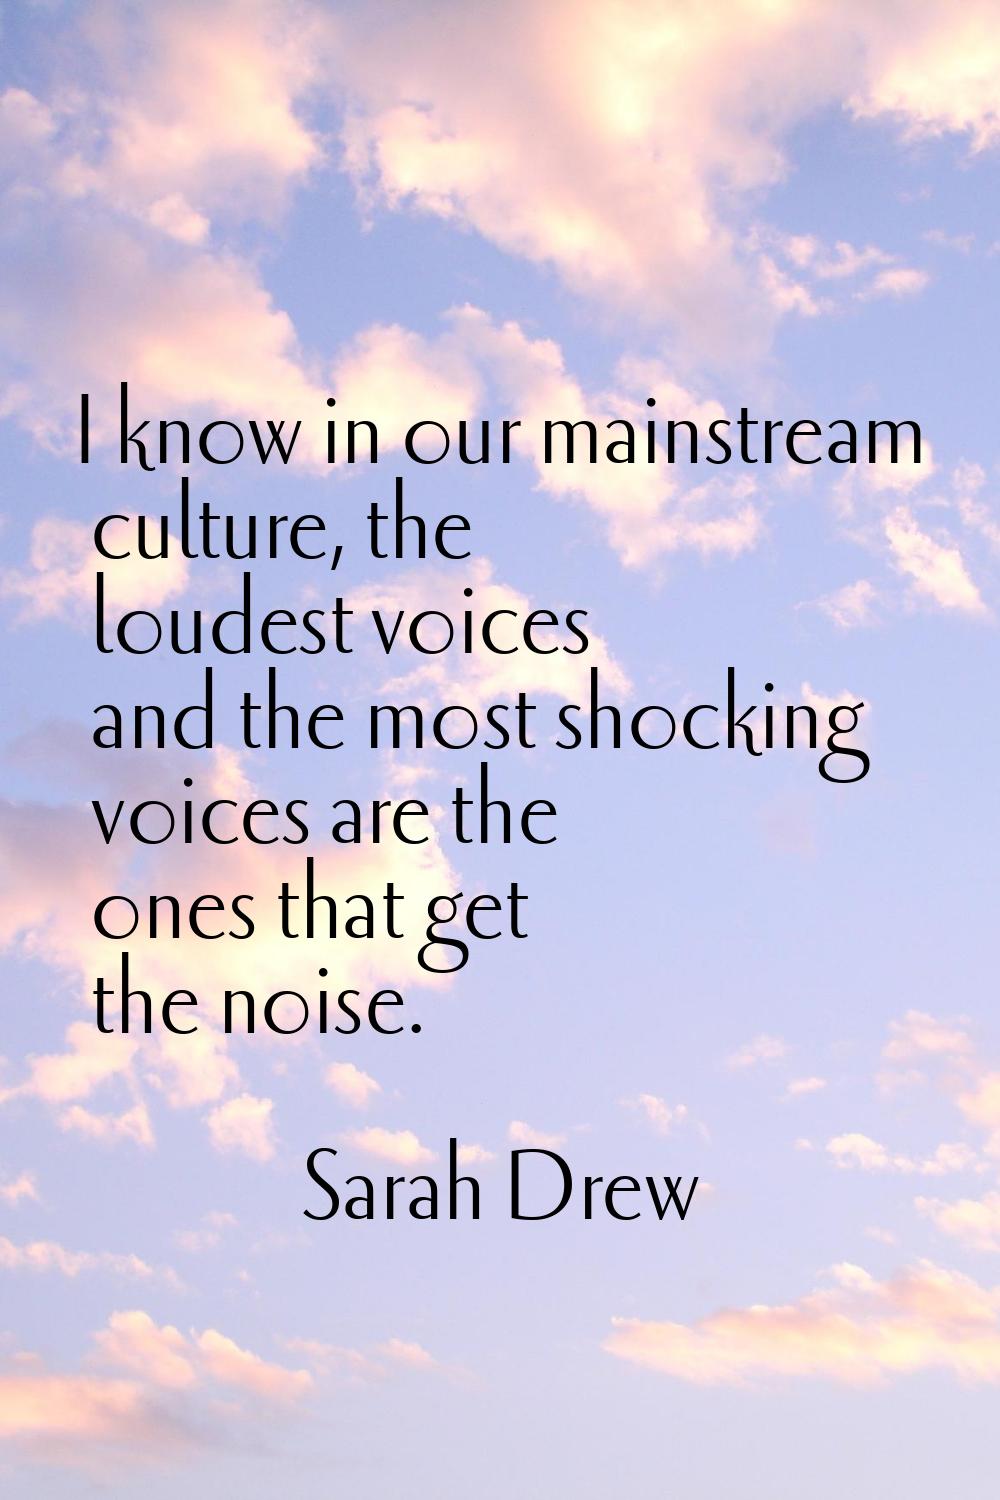 I know in our mainstream culture, the loudest voices and the most shocking voices are the ones that